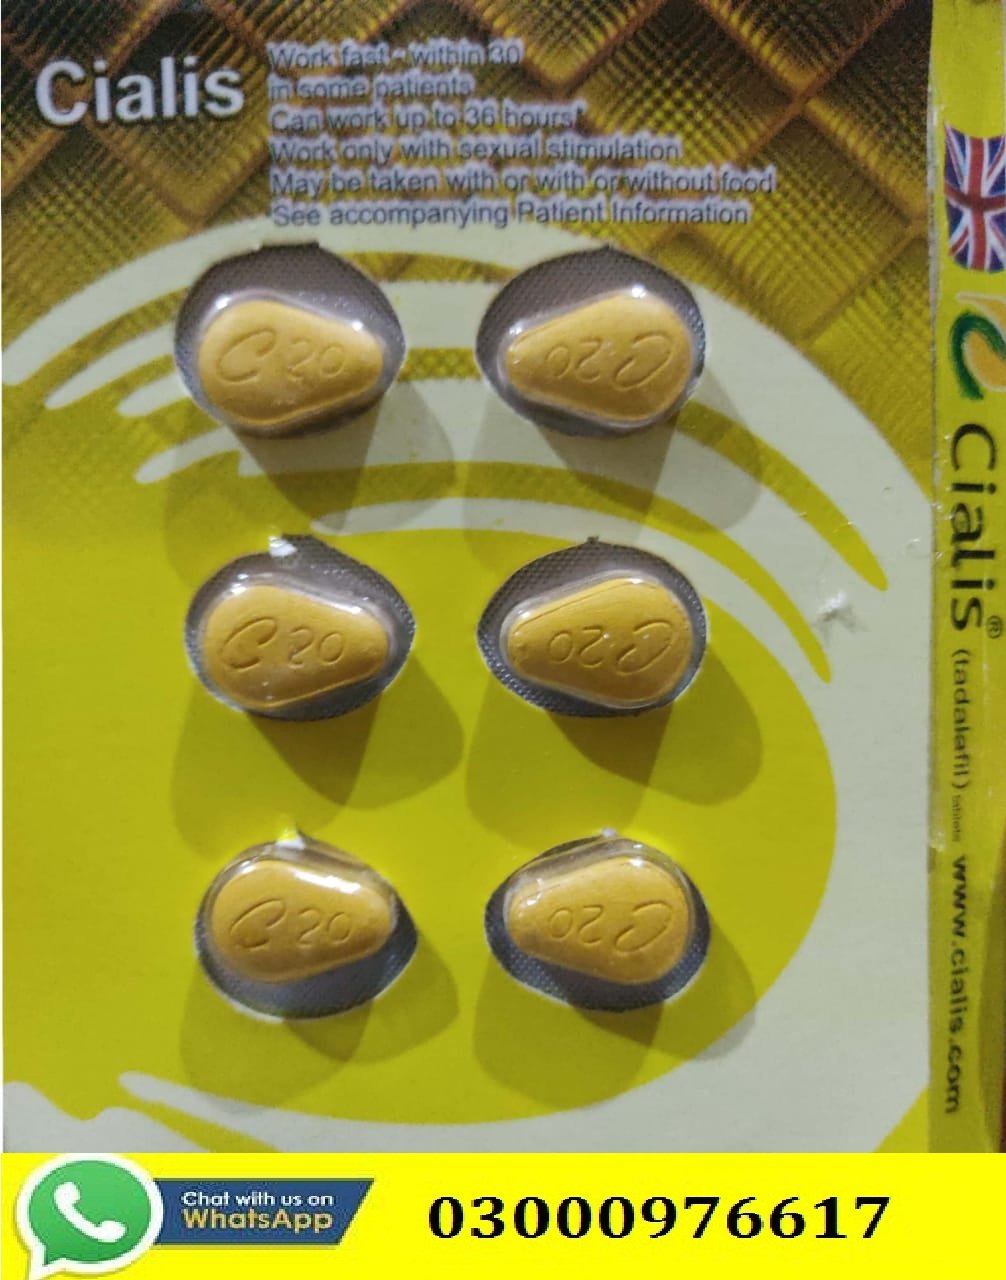 Cialis 6 Tablets in Islamabad -03000976617-etsyherbal.com